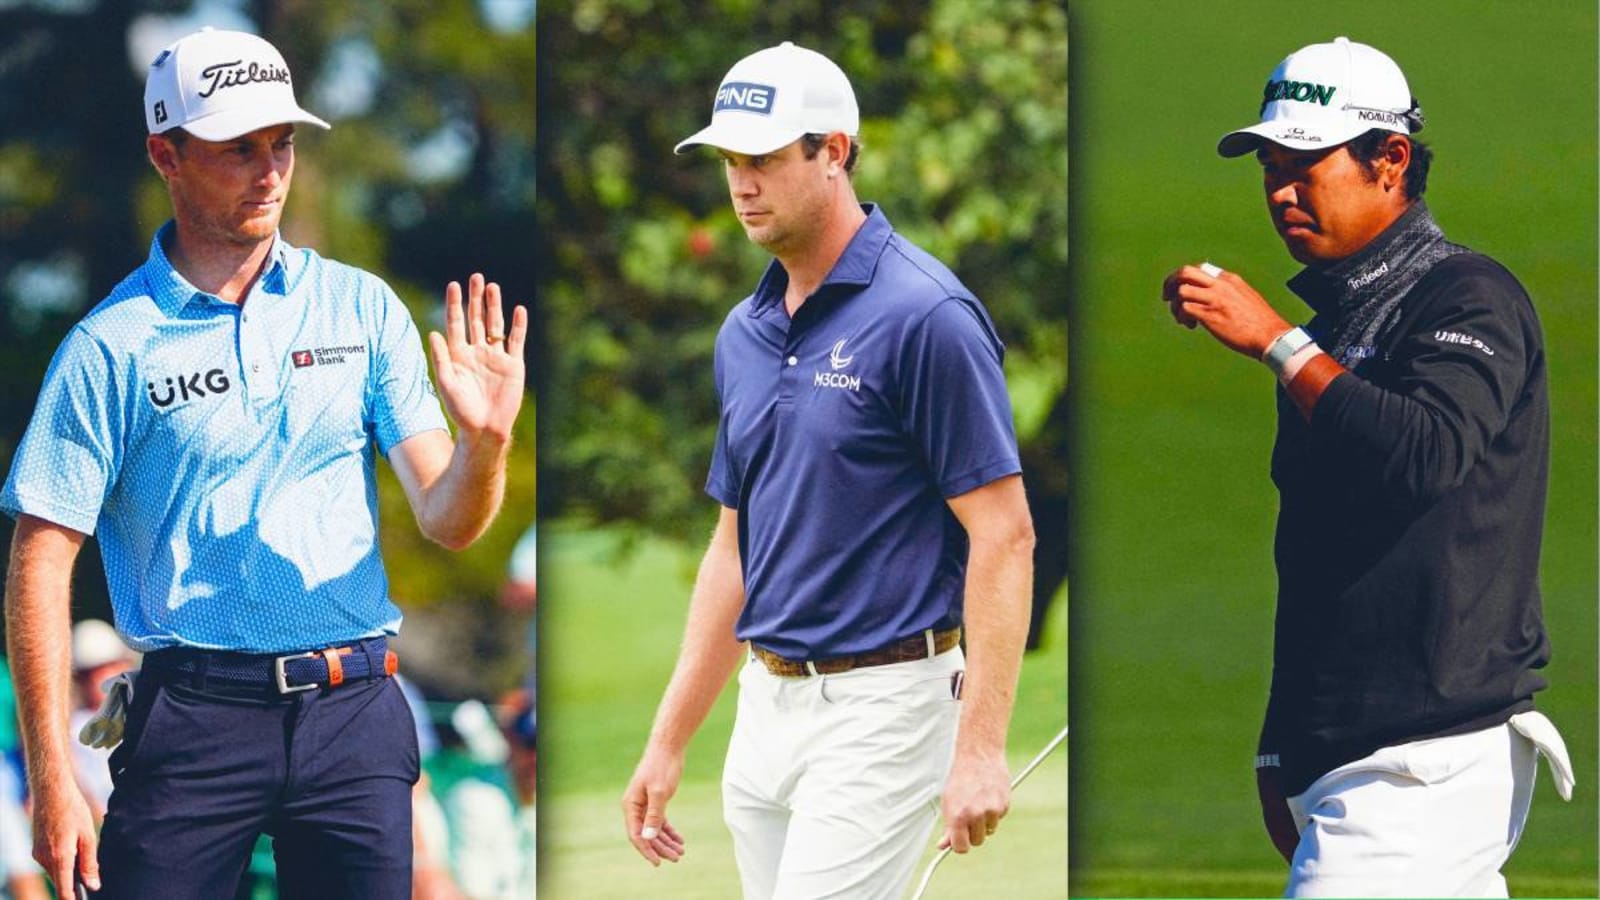 Golf best bets: Outright picks for the Wells Fargo Championship